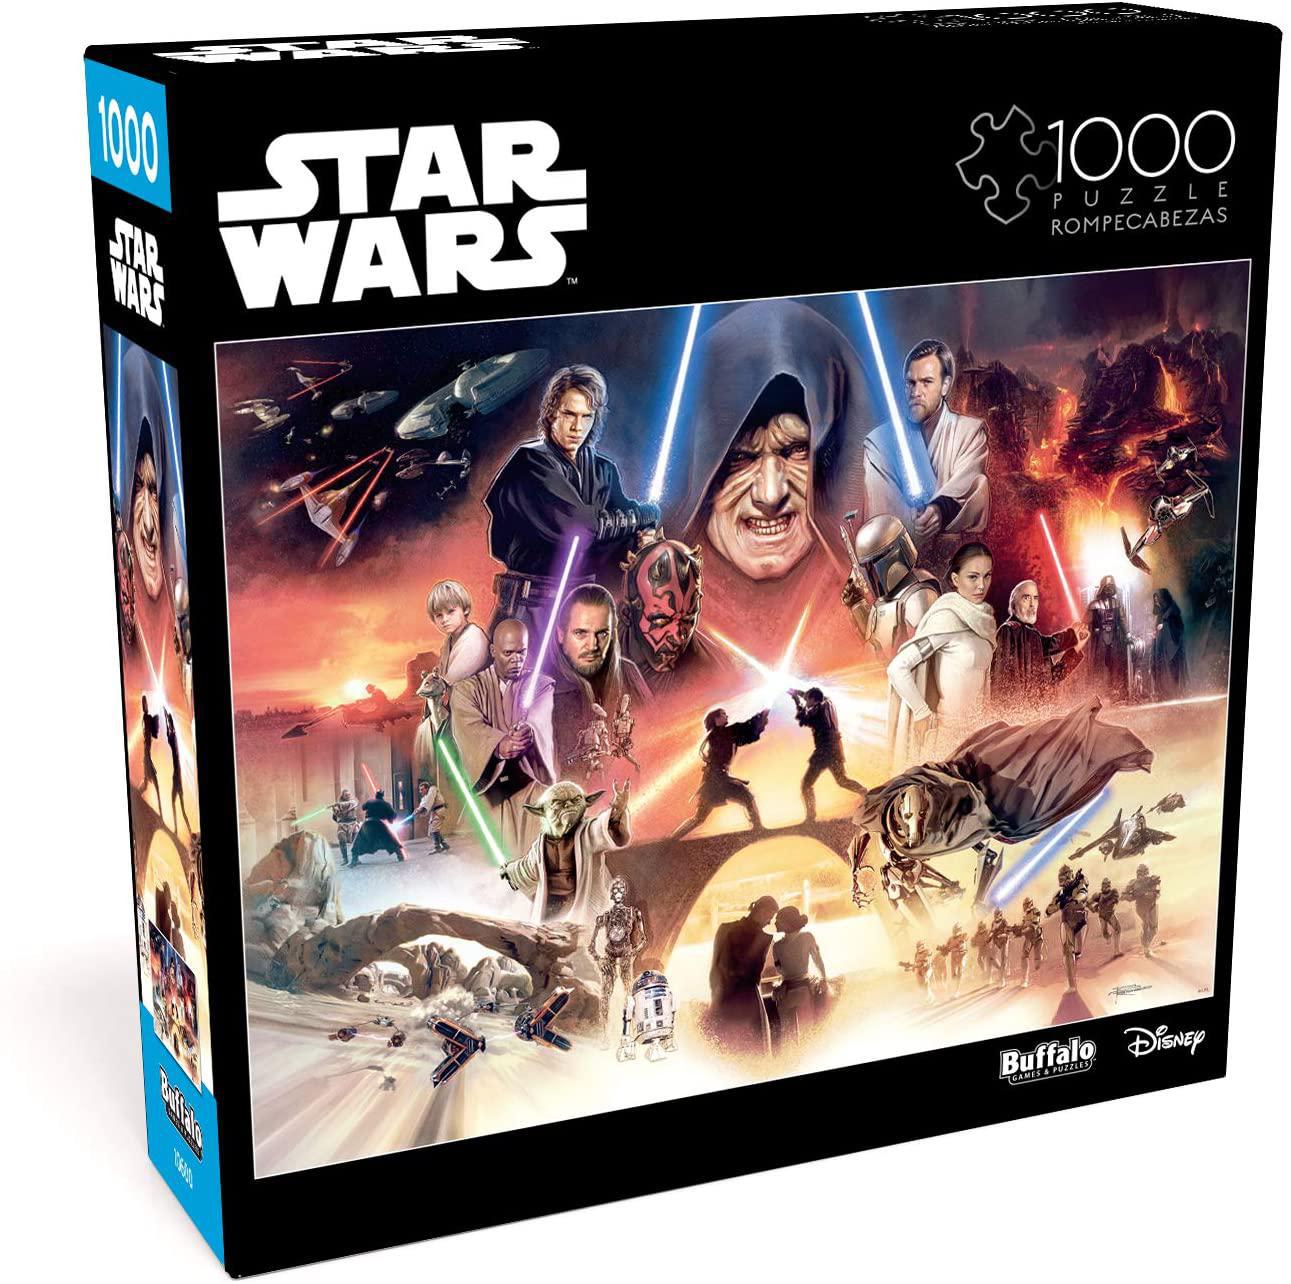 Star Wars Puzzles Assortment - The New Jedi Will Rise, Sense Great Fear in You - 1000 Piece Jigsaw Puzzle - Bonus Poster